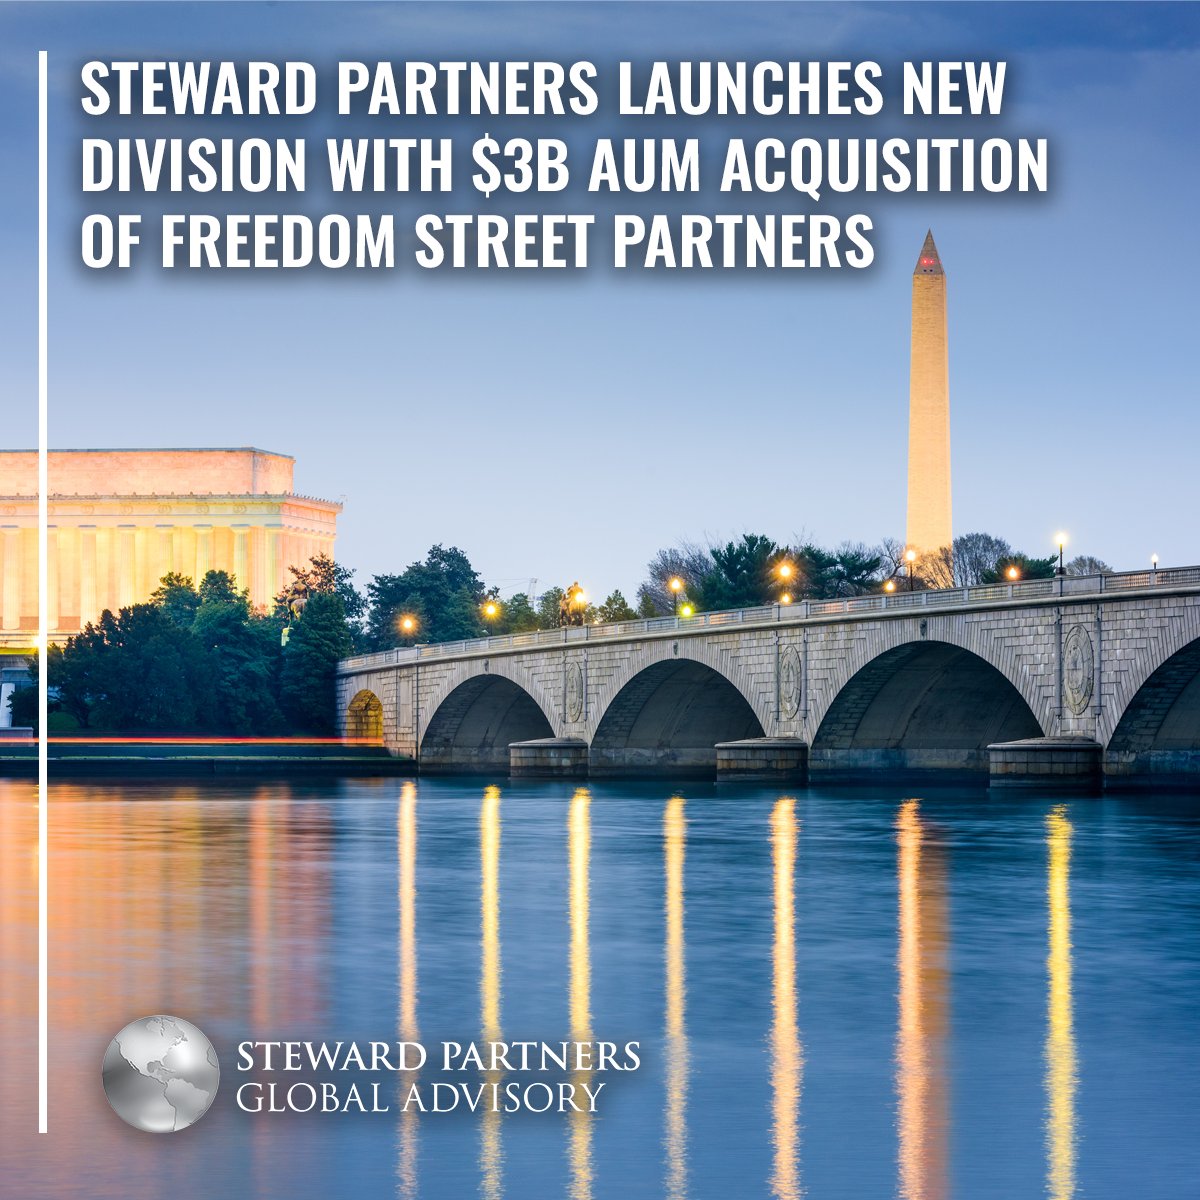 Steward Partners to Acquire $3.2B Shop - Freedom Street Partners, a Chesapeake, #Virginia–based firm seeding Steward’s “owned business” division, comprises a 38-person network of #independentfinancialadvisors.

ow.ly/MR2X50Q8TuJ

#NewAcquisition #WeAreGrowing #JoinOurTeam